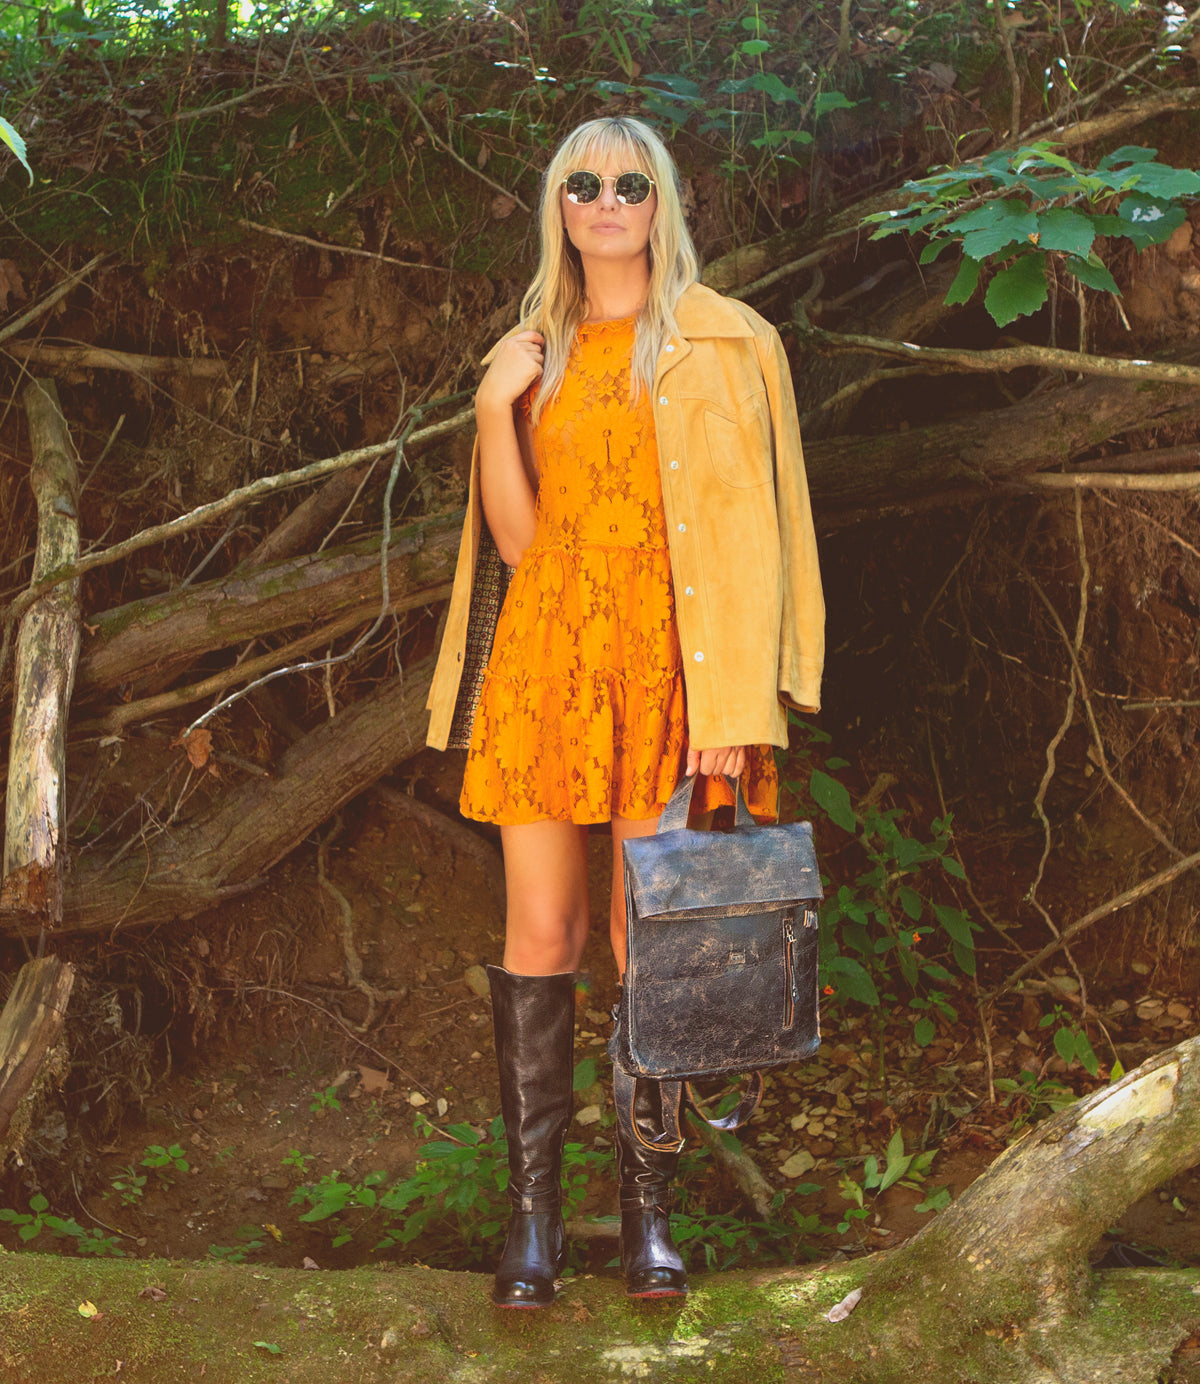 A blonde woman in a yellow dress standing in the woods holding a Bed Stu Howie leather bag.